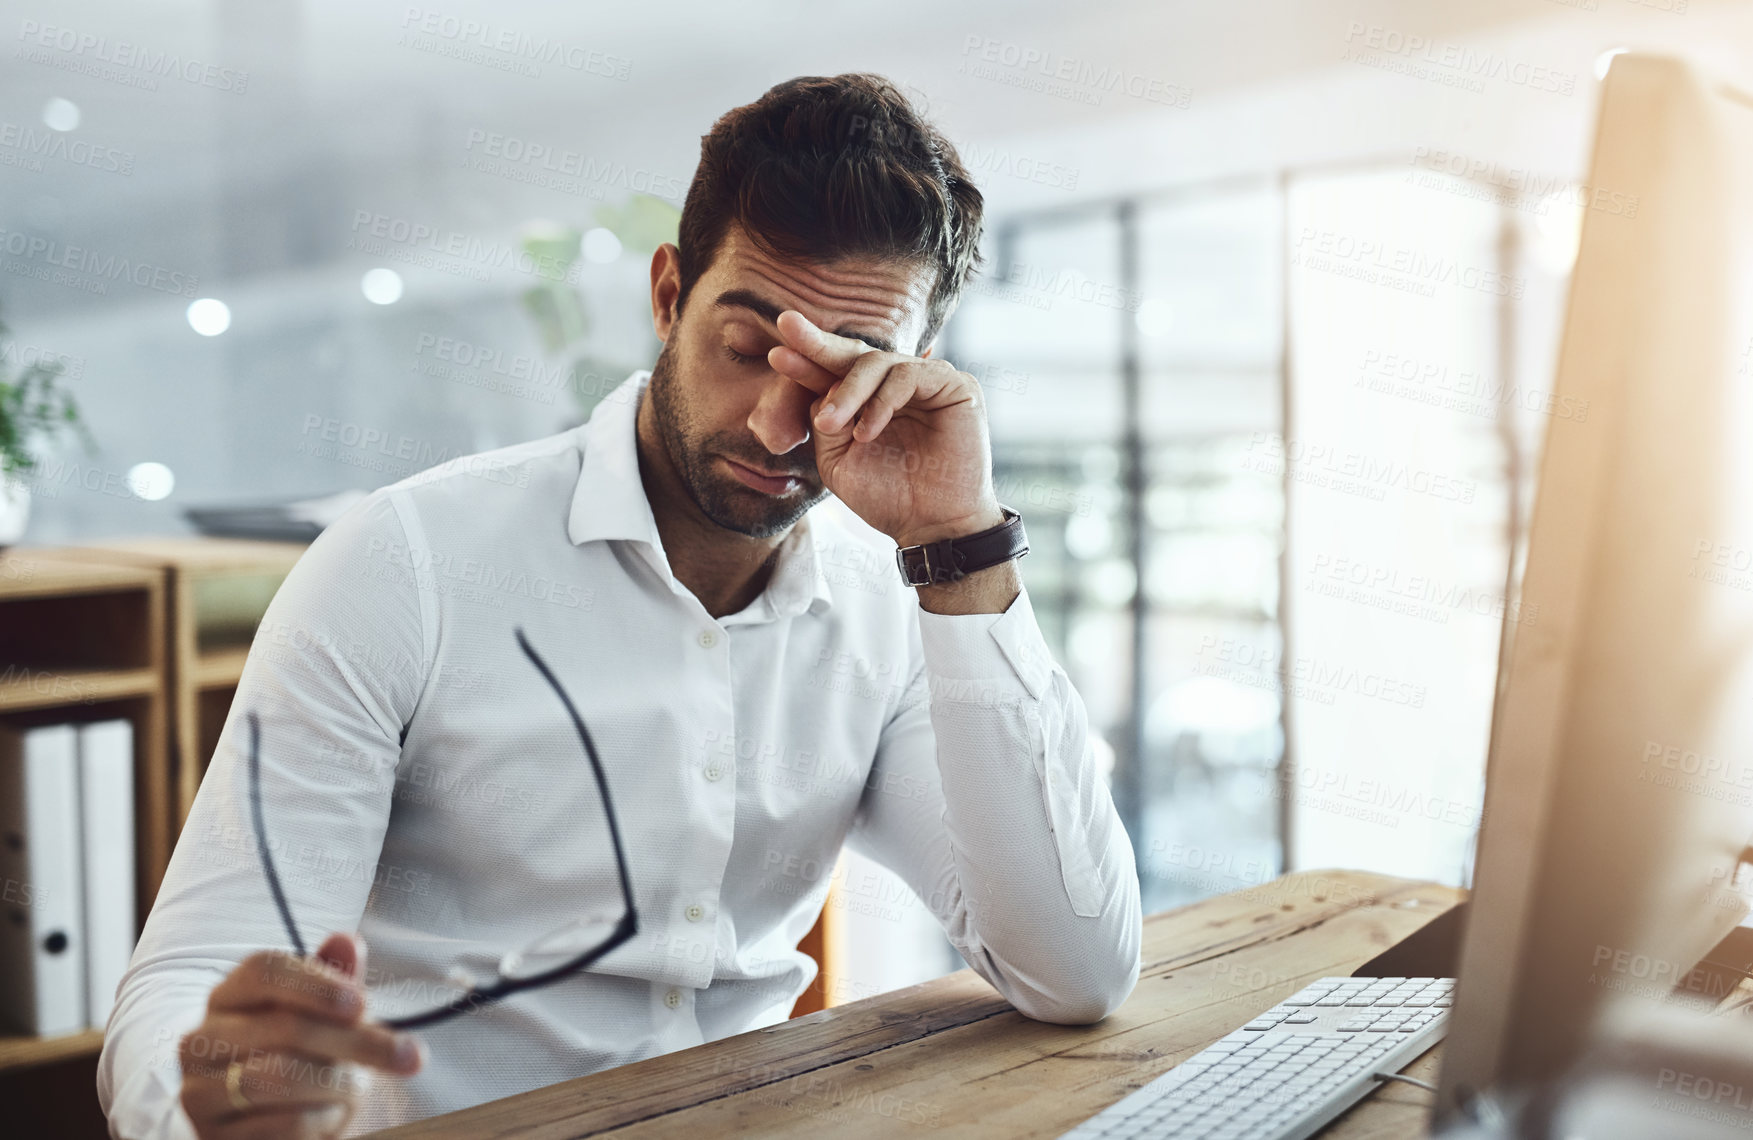 Buy stock photo Sad, tired and a man at work with burnout, career problem or anxiety from deadline. Corporate, working and a businessman with fatigue, mental health issue and stress from mistake in professional job